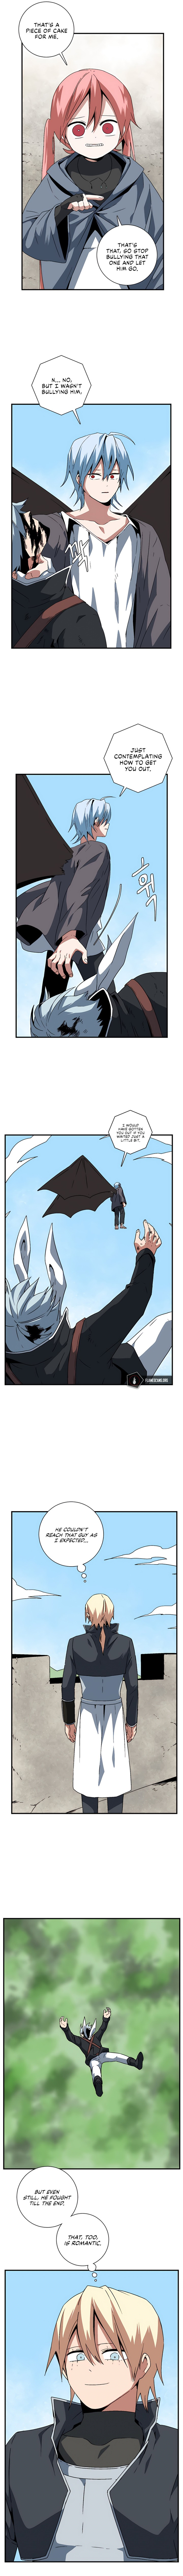 One Step For The Dark Lord Chapter 43 Page 2